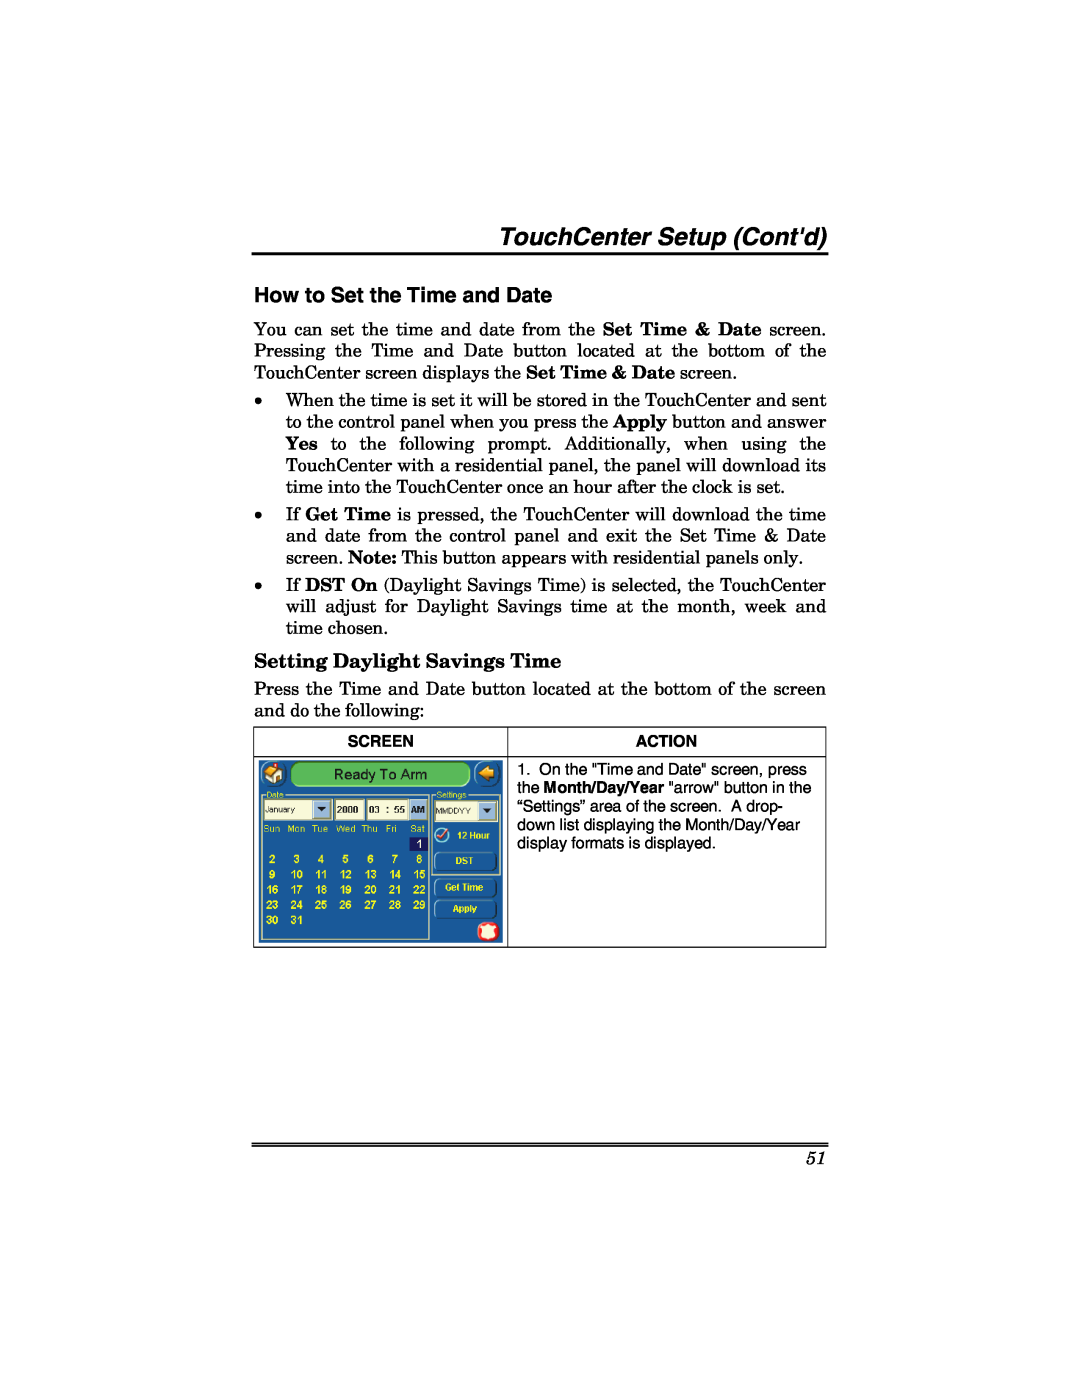 Honeywell 6271 manual How to Set the Time and Date, Setting Daylight Savings Time, TouchCenter Setup Contd 